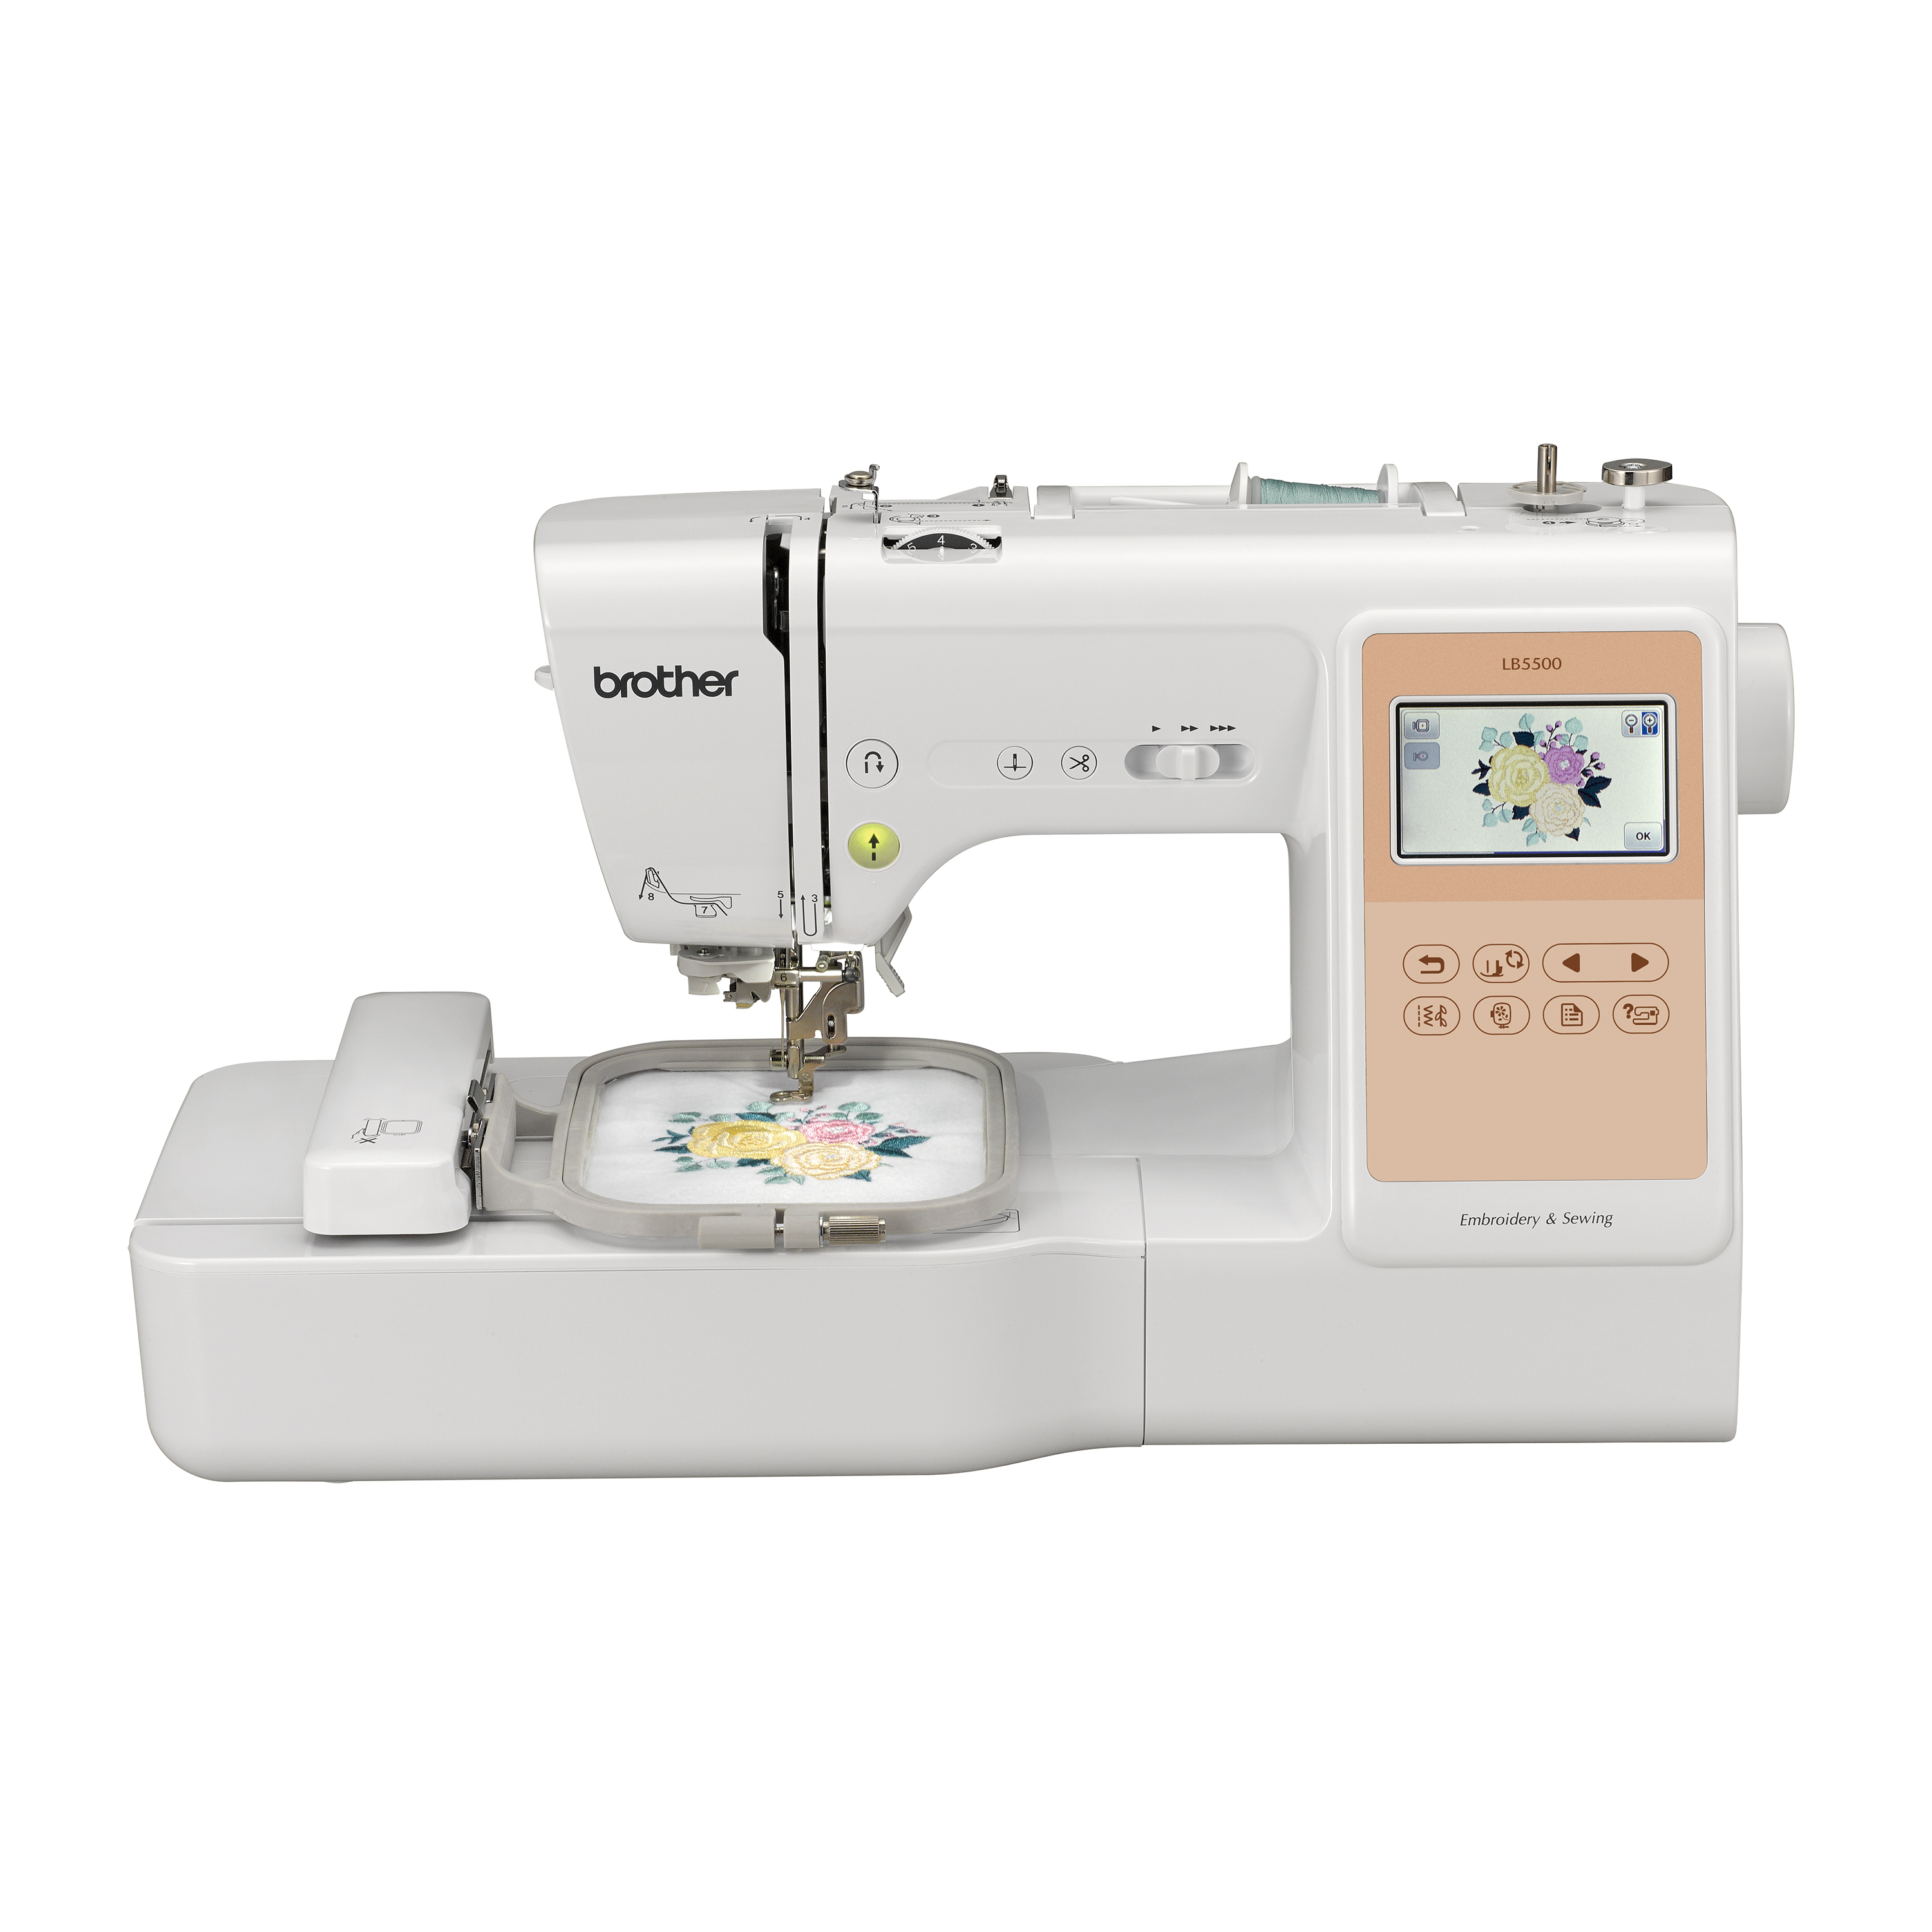 Brother SE600 Embroidery Machine w/ Deluxe Sewing & Embroidery Bundle